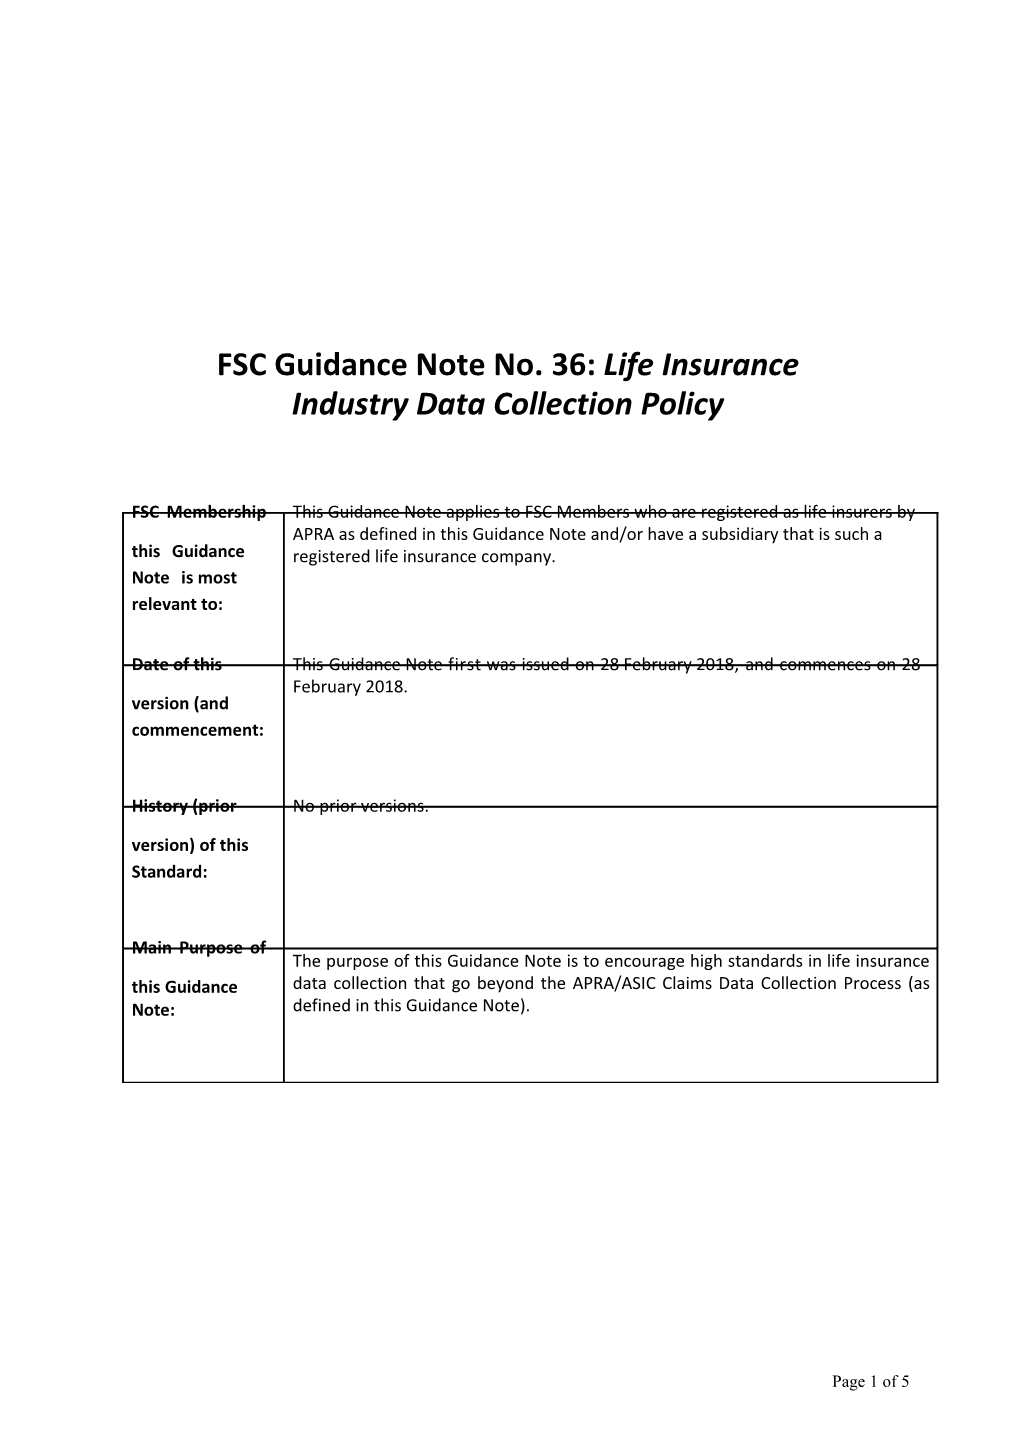 FSC Guidance Note No. 36:Lifeinsurance Industry Data Collection Policy